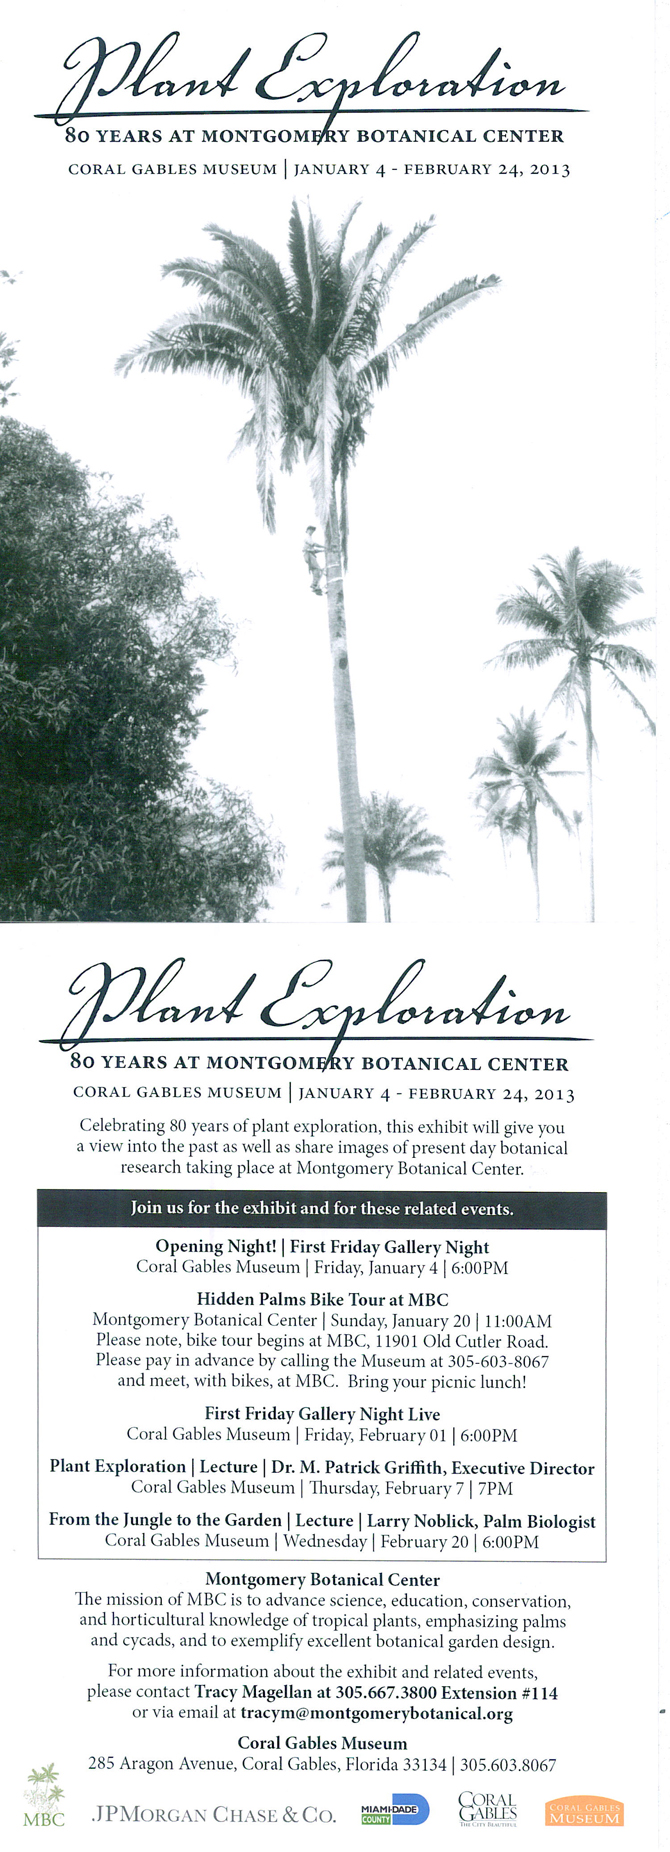 Plant Exploration: 80 years at Montgomery Botanical Center. Coral Gables Museum, January 4 to February 24, 2013. Join us for the exhibit and several related events.